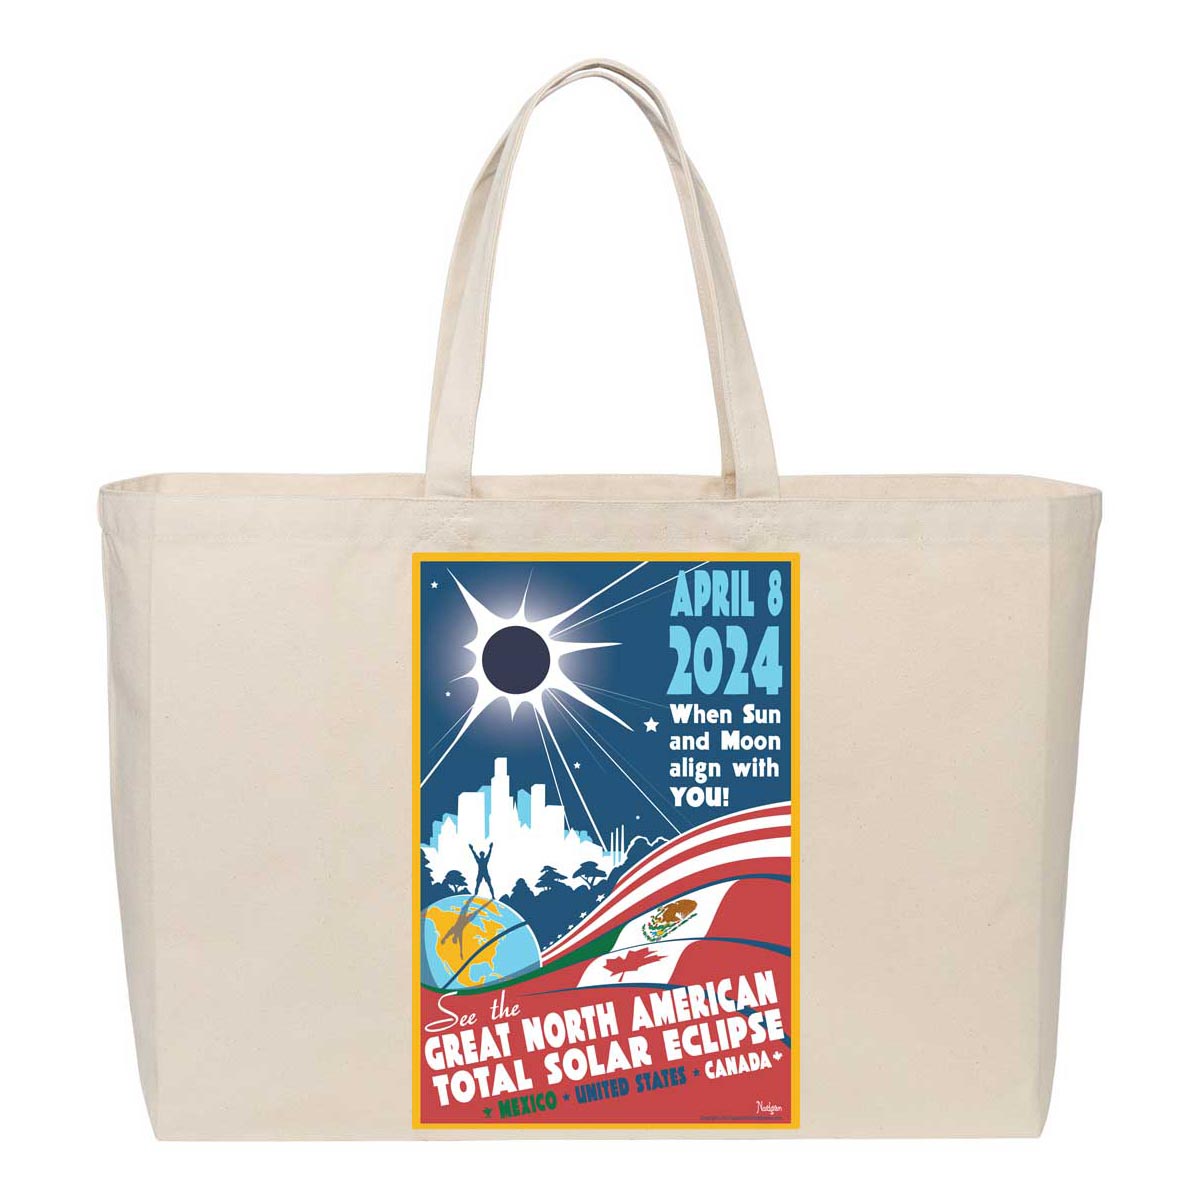 Great North American Solar Eclipse 2024 Tote Bag Eclipse Merchandise